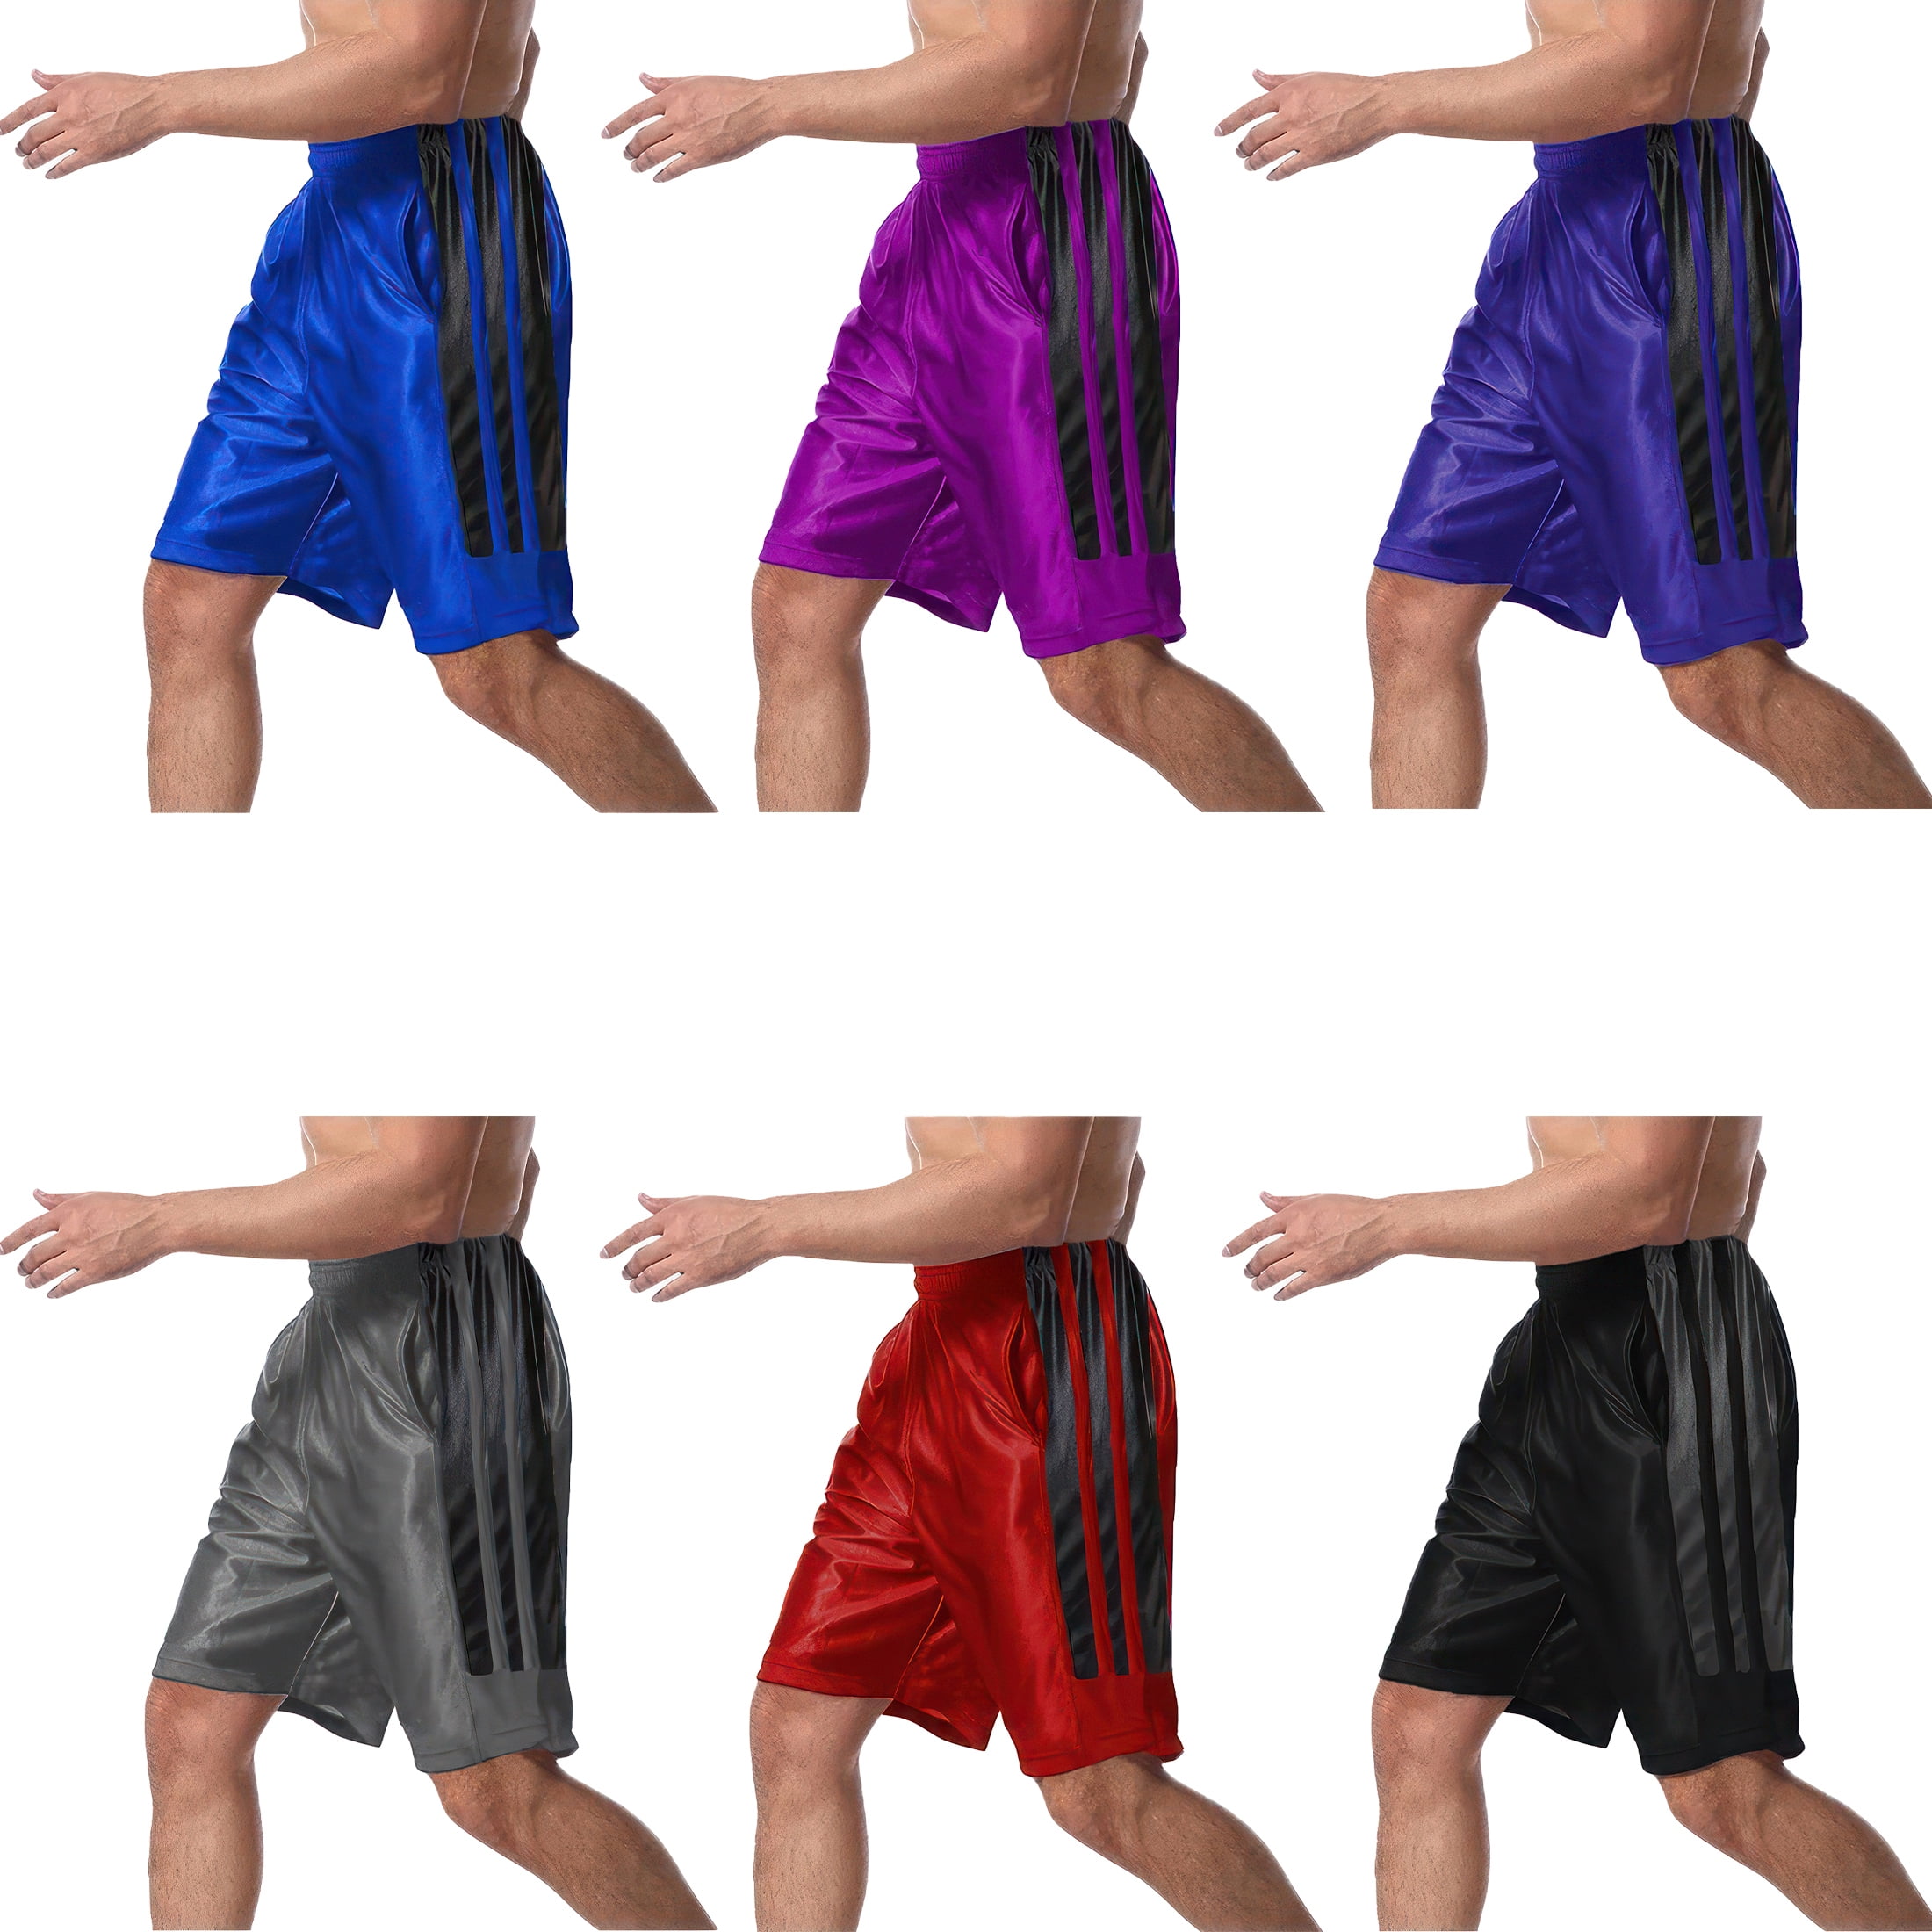 3-Pack Men's Dazzle Basketball Shorts Striped Quick-Dry Moisture-Wicking Summer Shorts With Pockets Workout -